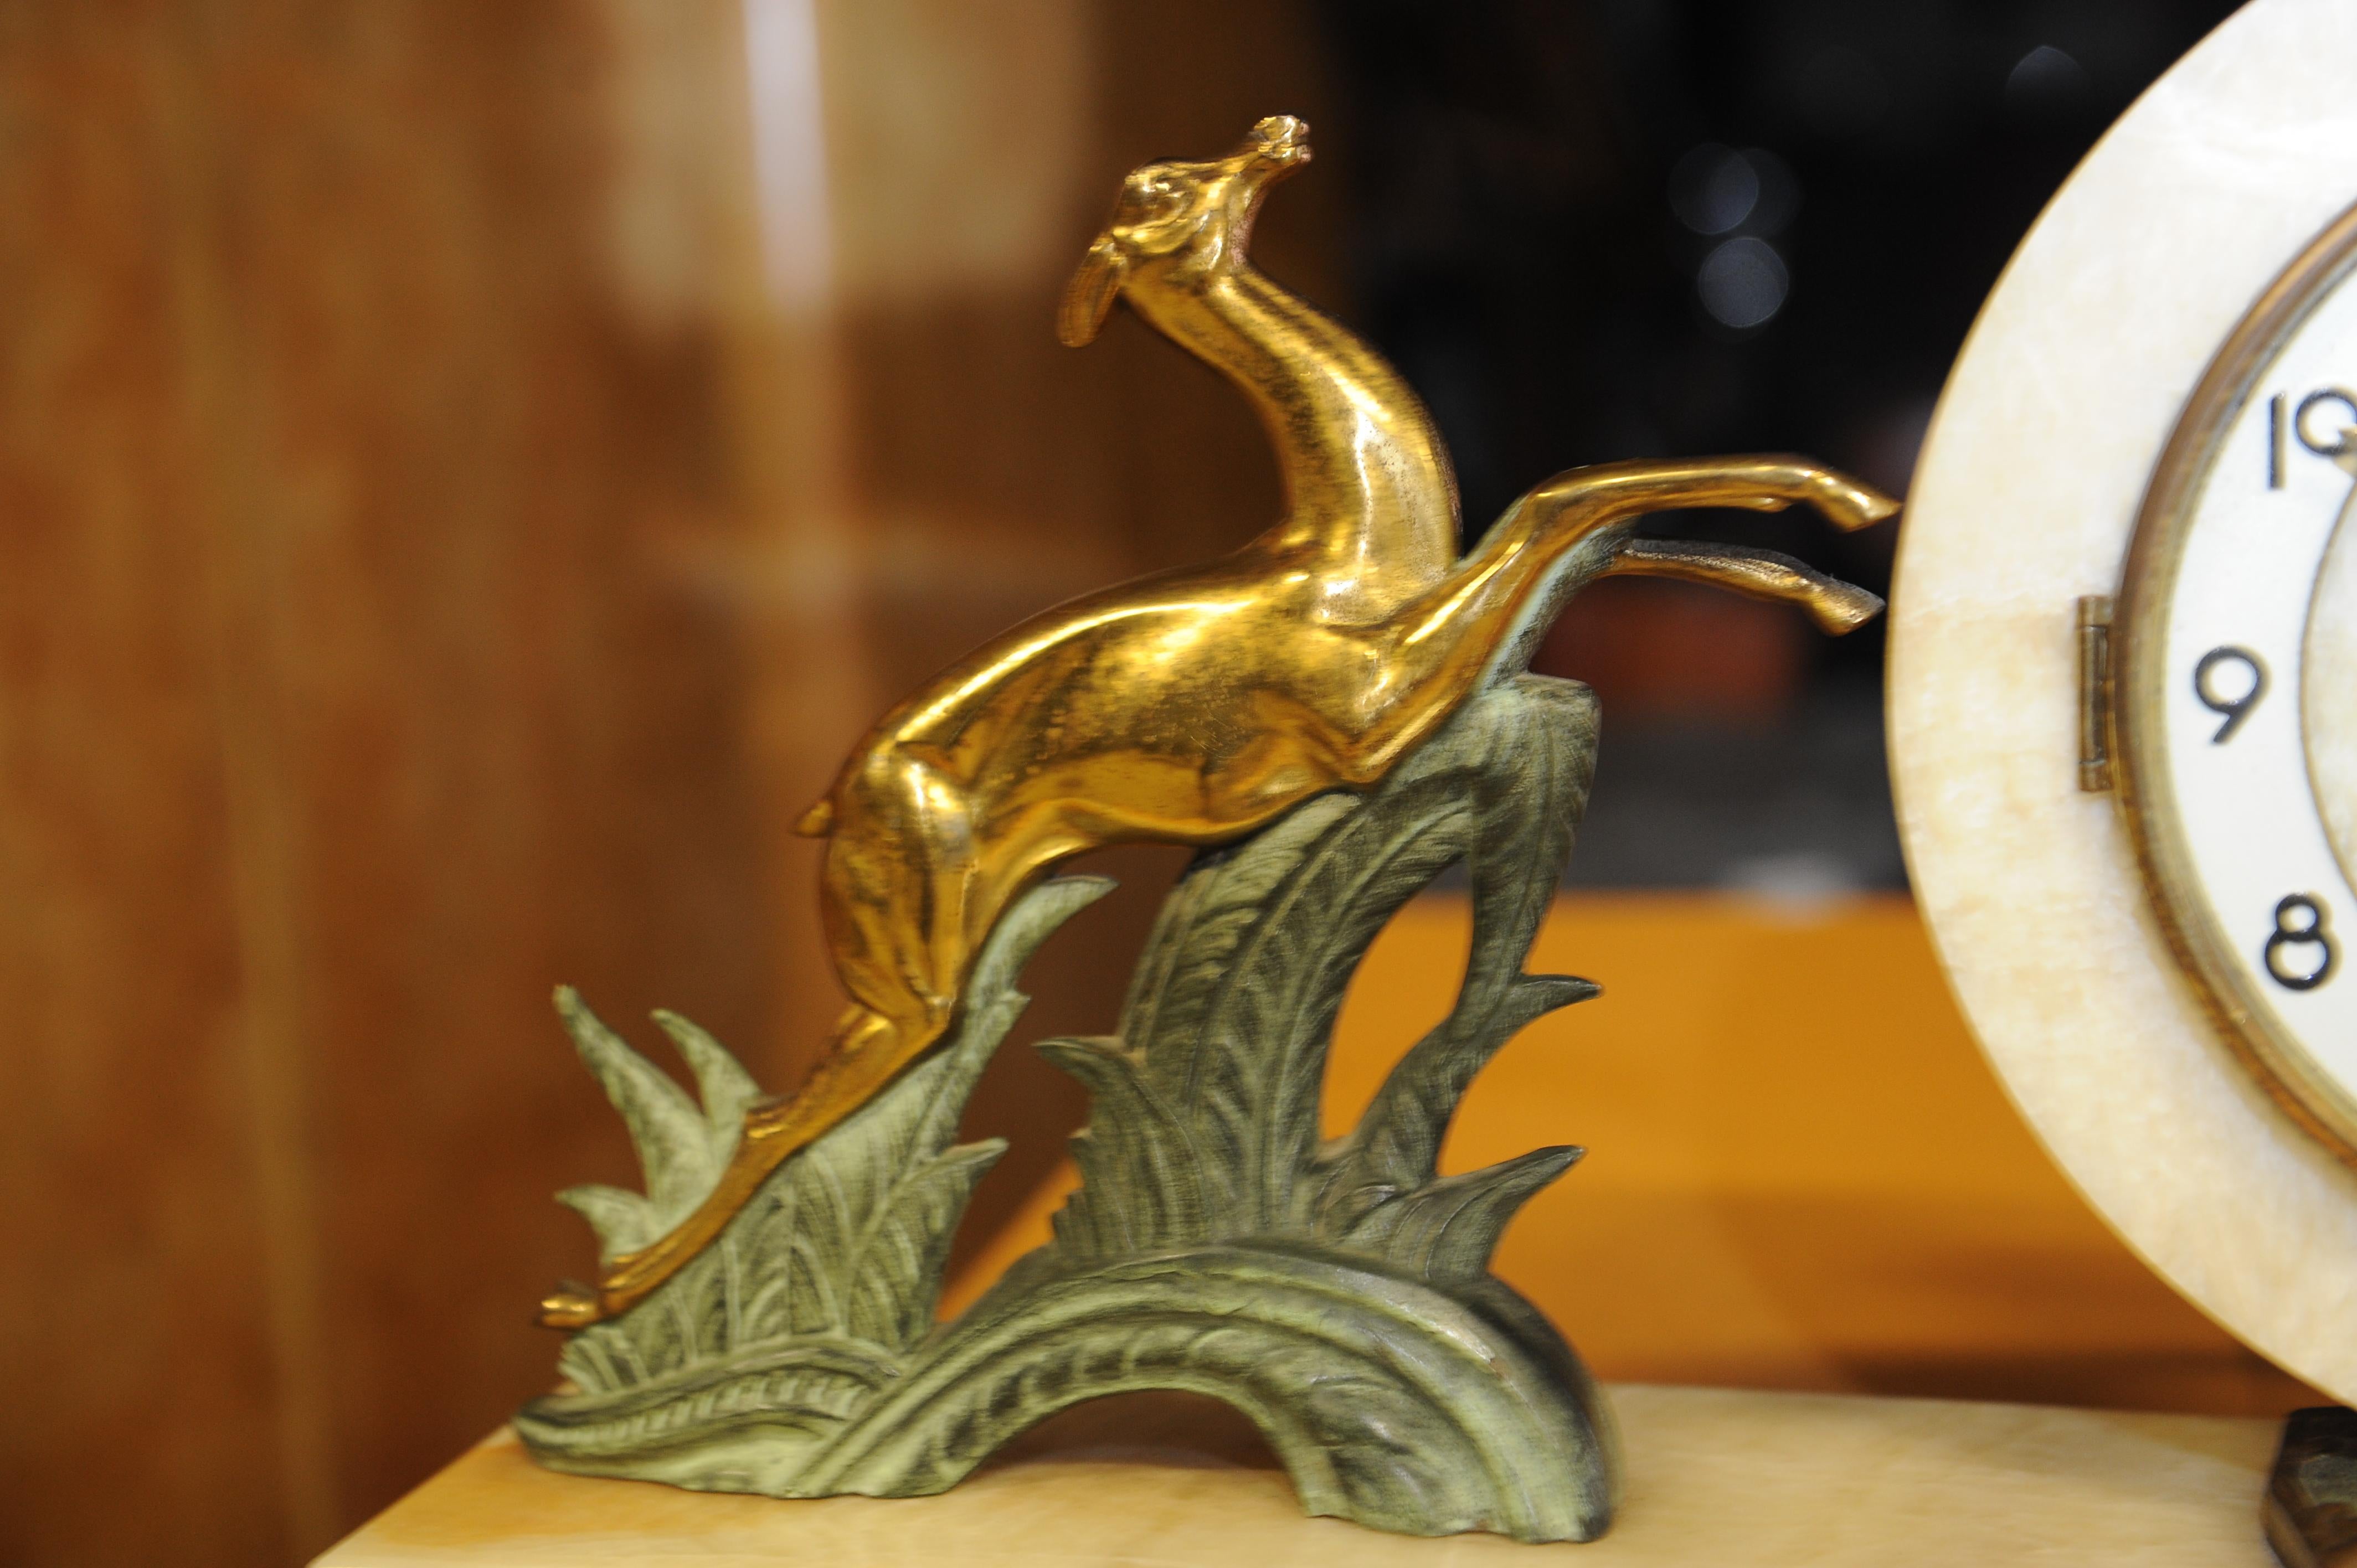 Bayard Art Deco Onyx, Marble and Spelter Mantle Clock with Gilt Leaping Deer For Sale 2